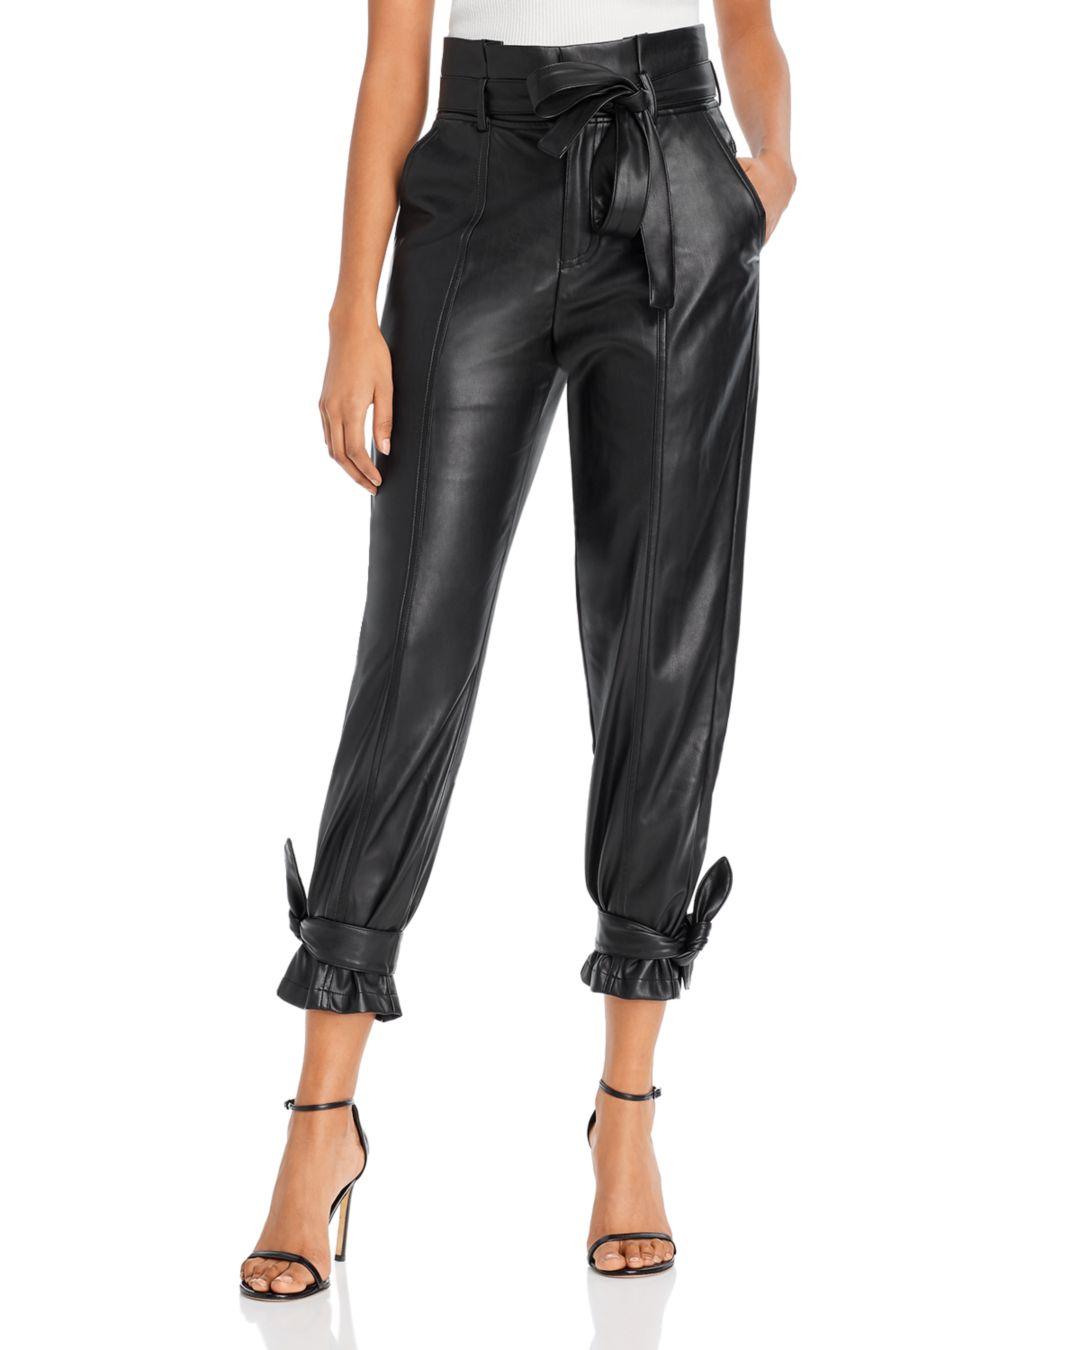 Lucy Paris Faux Leather Ankle Tie Pants in Black - Lyst